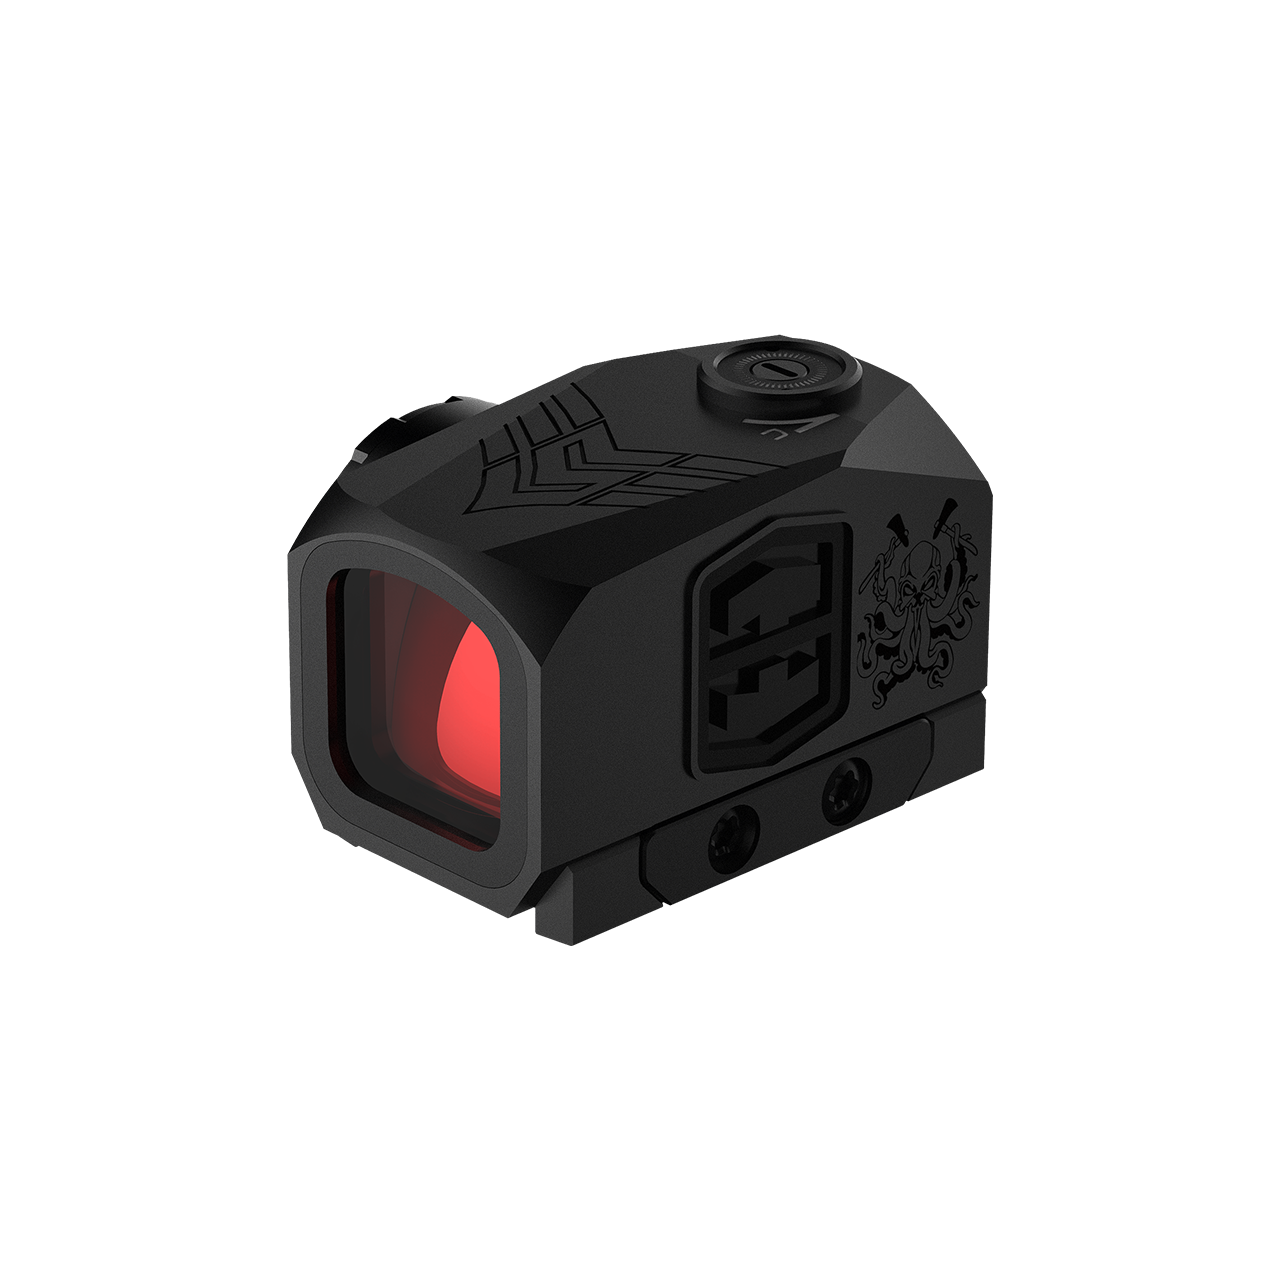 Kraken Compact Closed Emitter Red Dot  High Performance Tactical Optics  for Home Defense